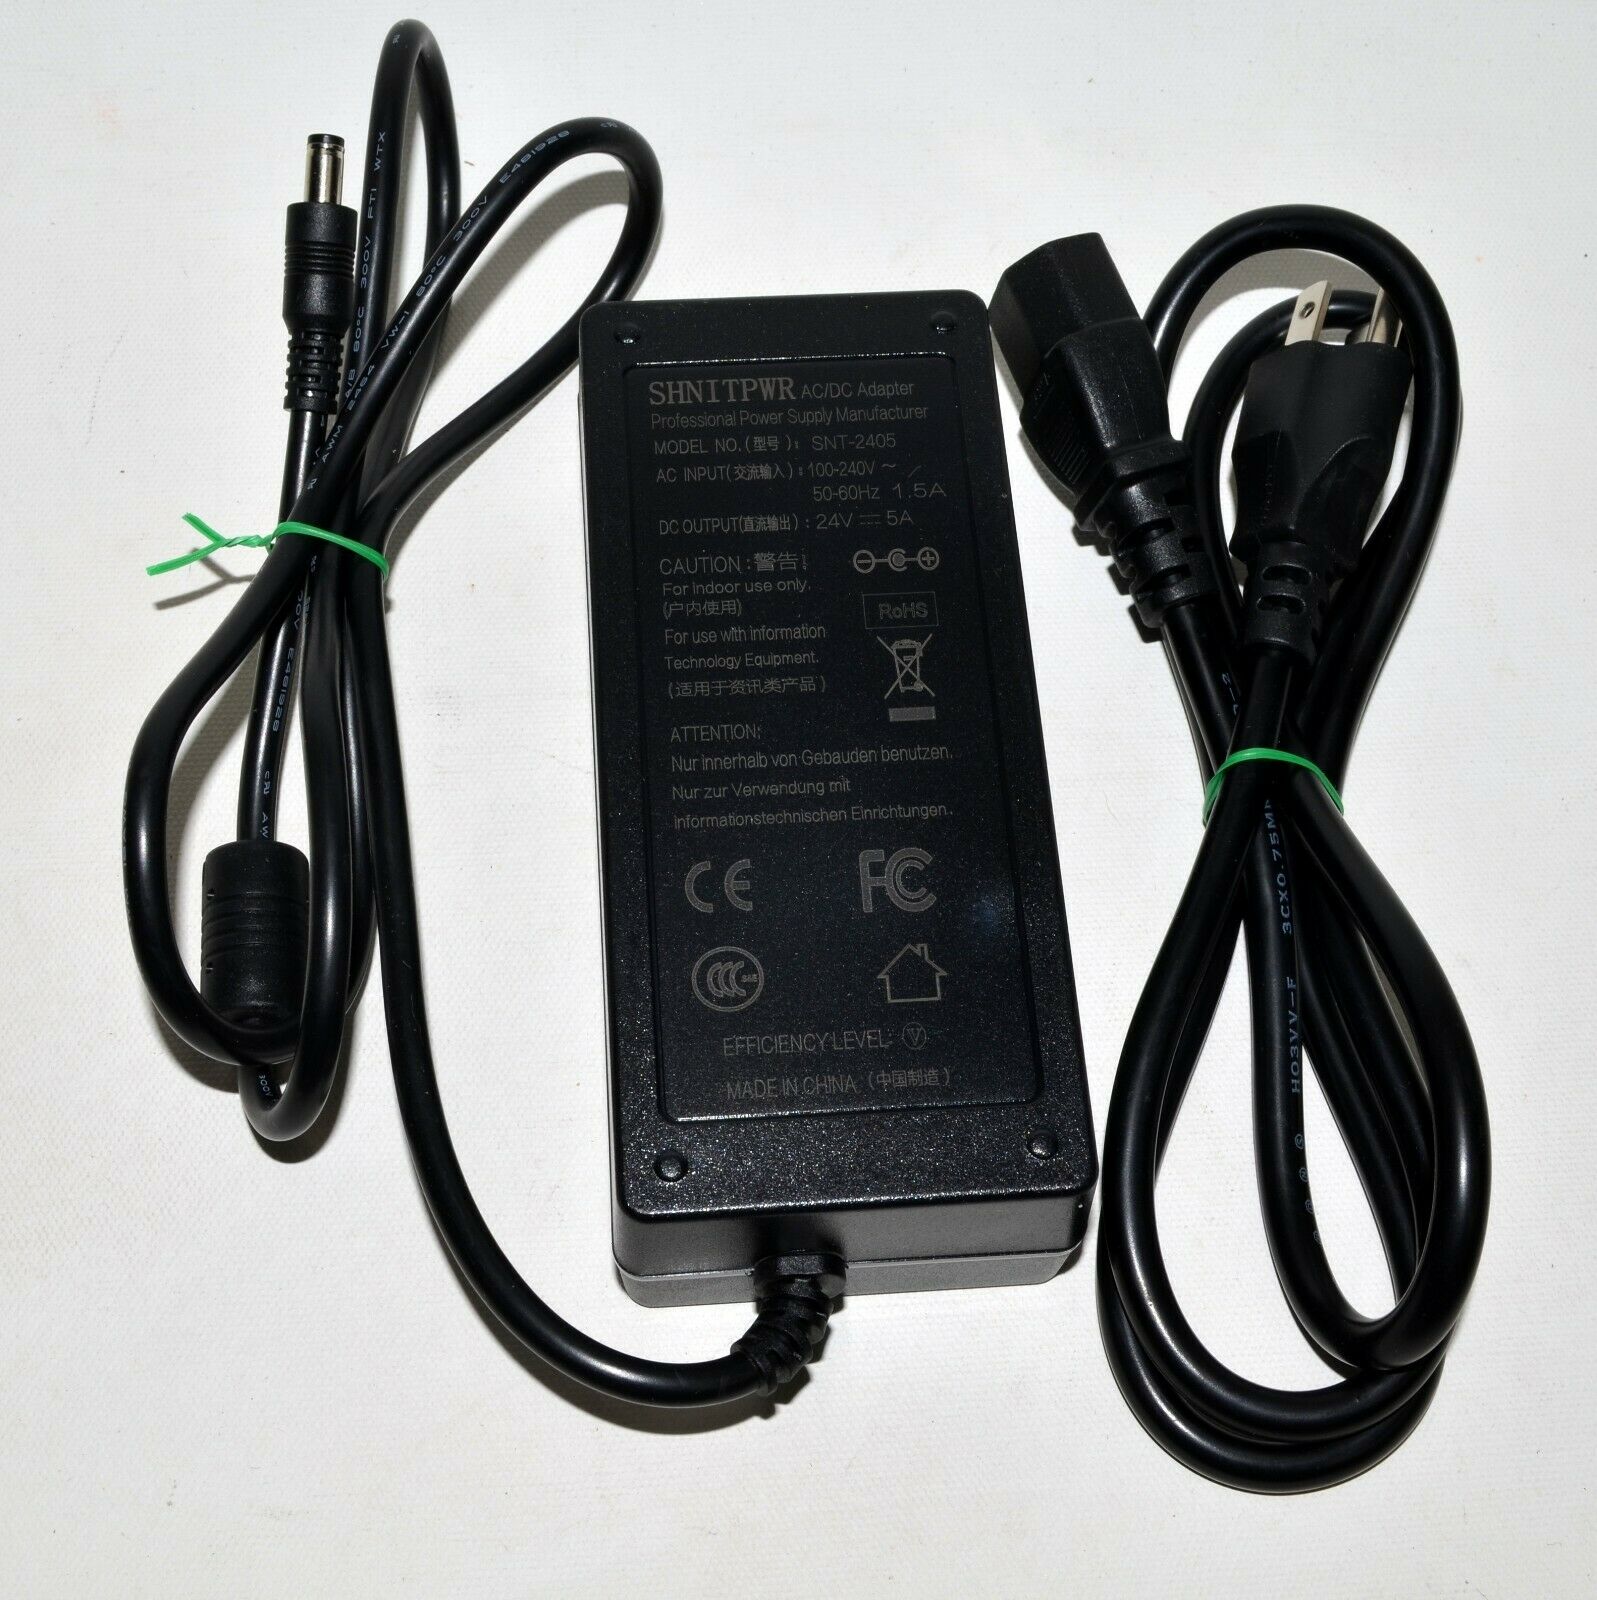 Shnitpwr ACDC Power Adapter Supply SNT-2405 24V 5A Compatible Brand: Universal Brand: Shnitpwr - Click Image to Close